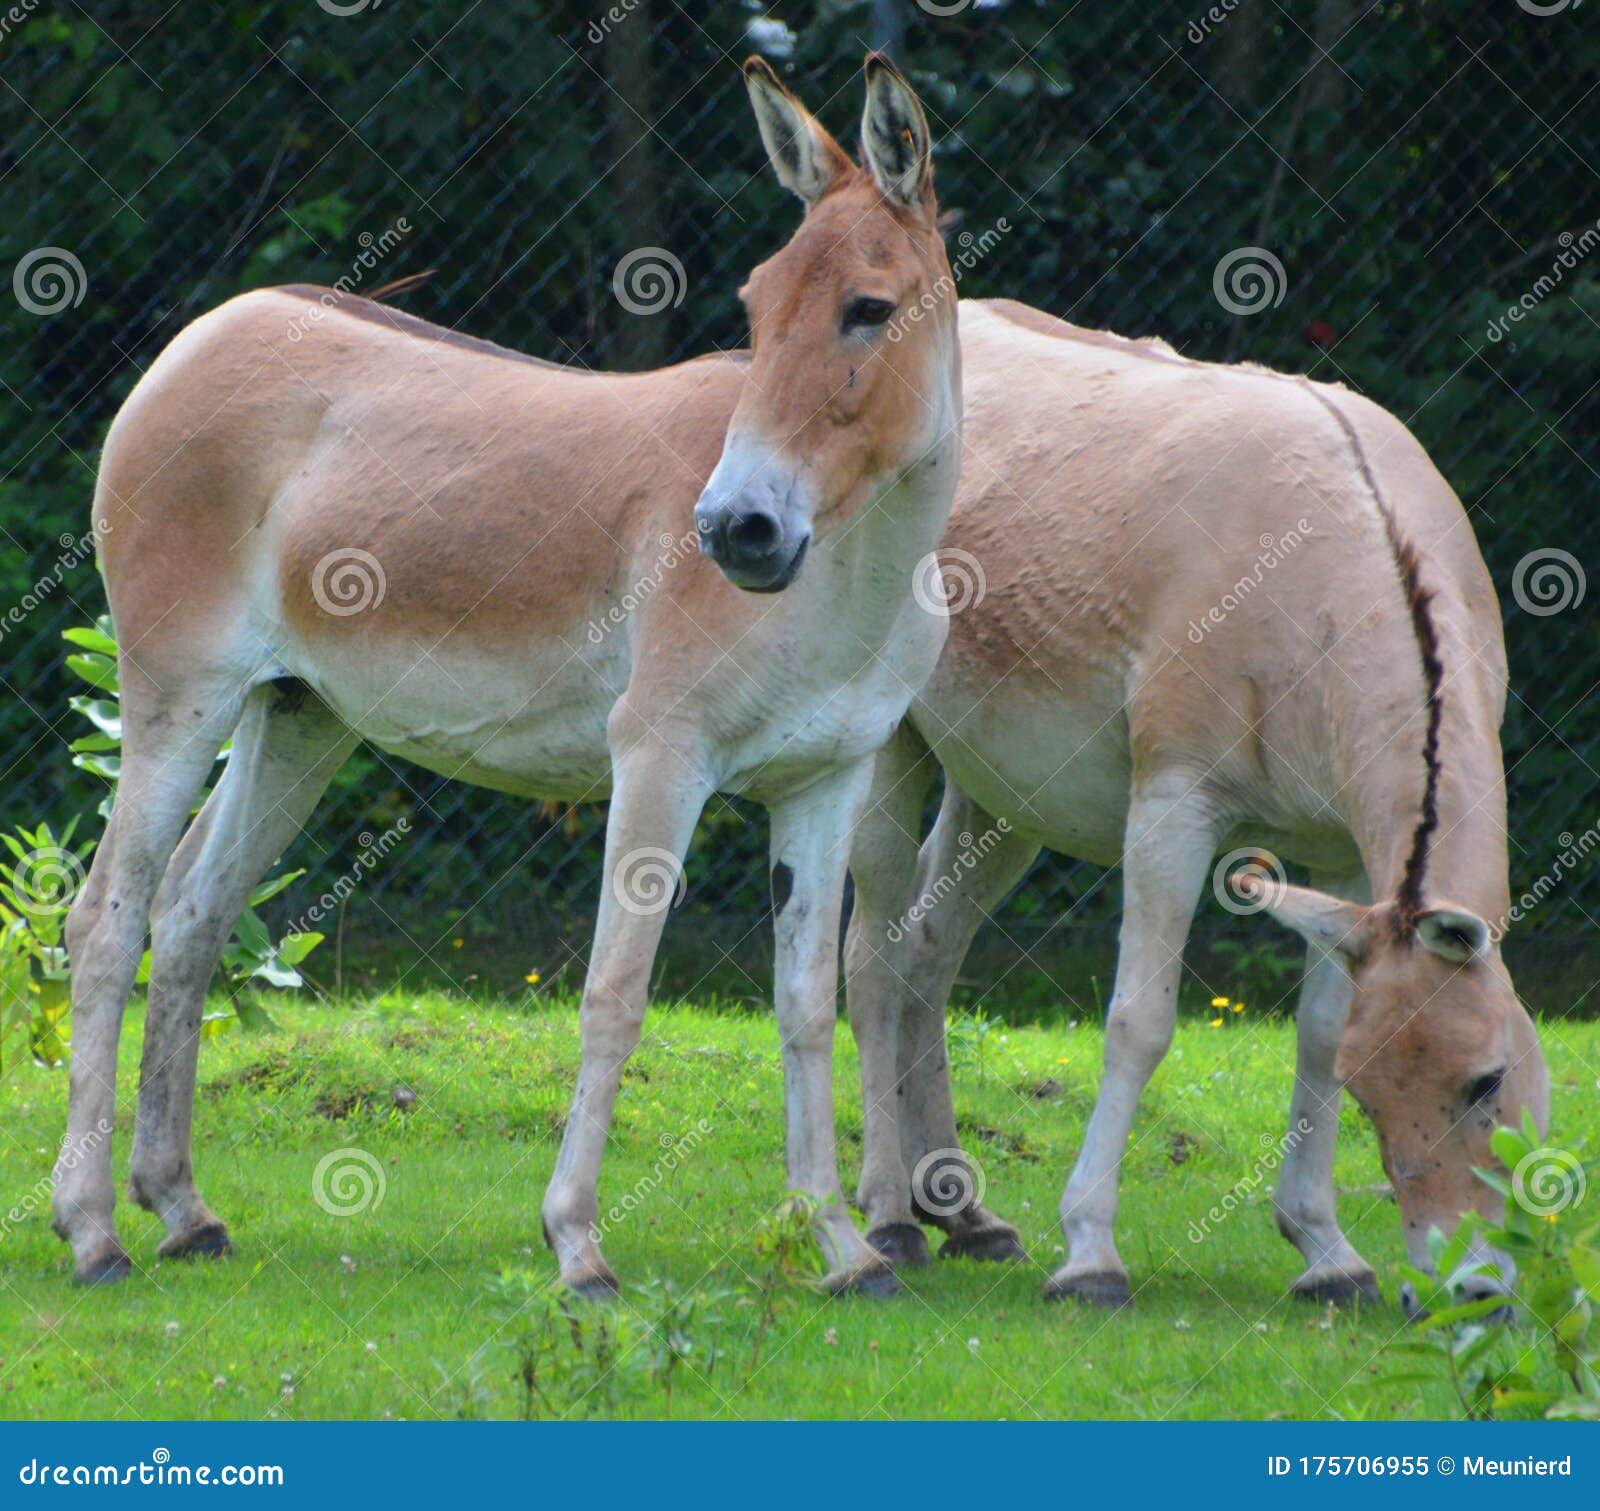 the onager equus hemionus, also known as hemione